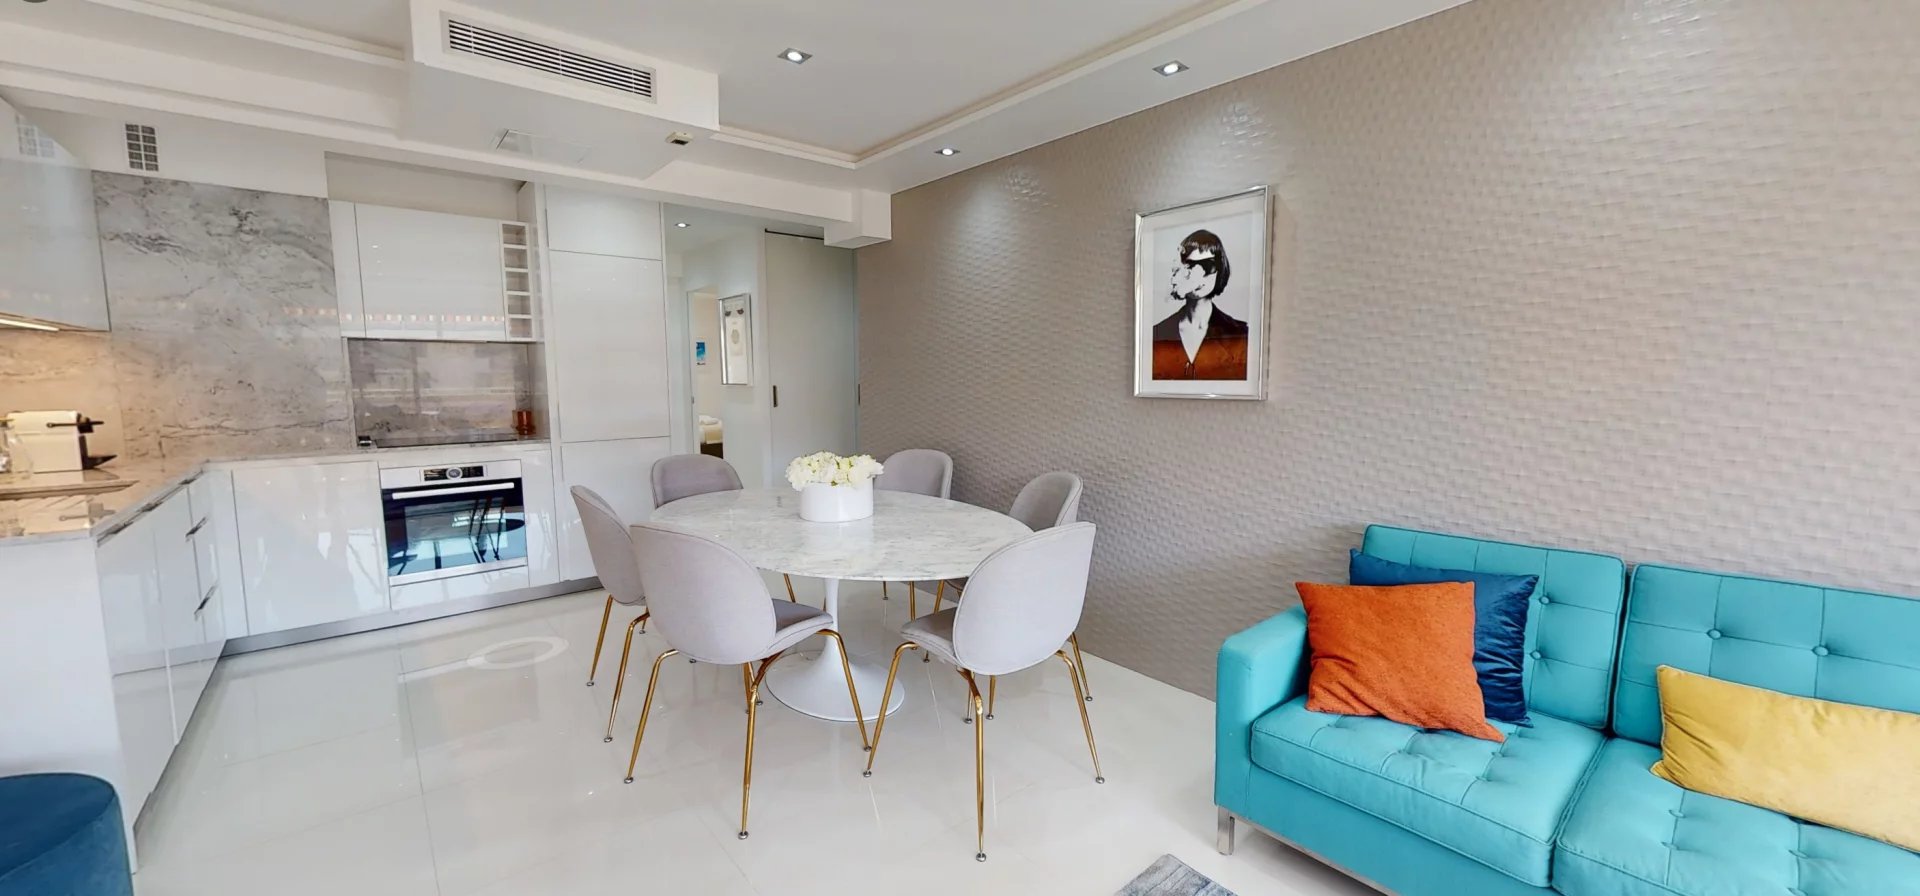 CANNES CENTRE - 3 BEDROOM APARTMENT